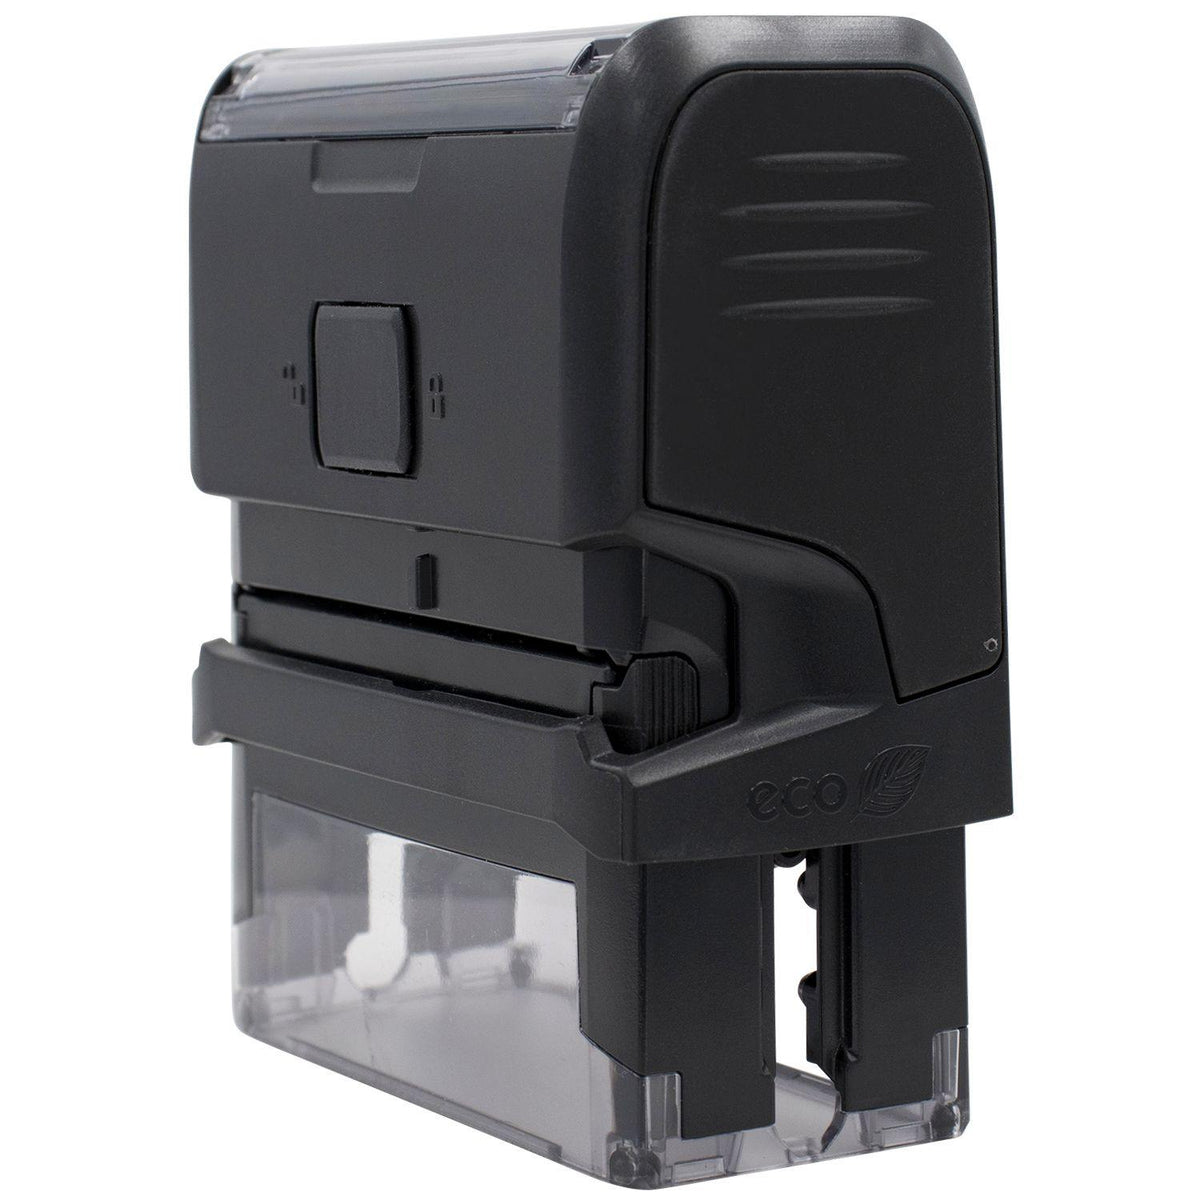 Self Inking Hepatitis Stamp - Engineer Seal Stamps - Brand_Trodat, Impression Size_Small, Stamp Type_Self-Inking Stamp, Type of Use_Medical Office